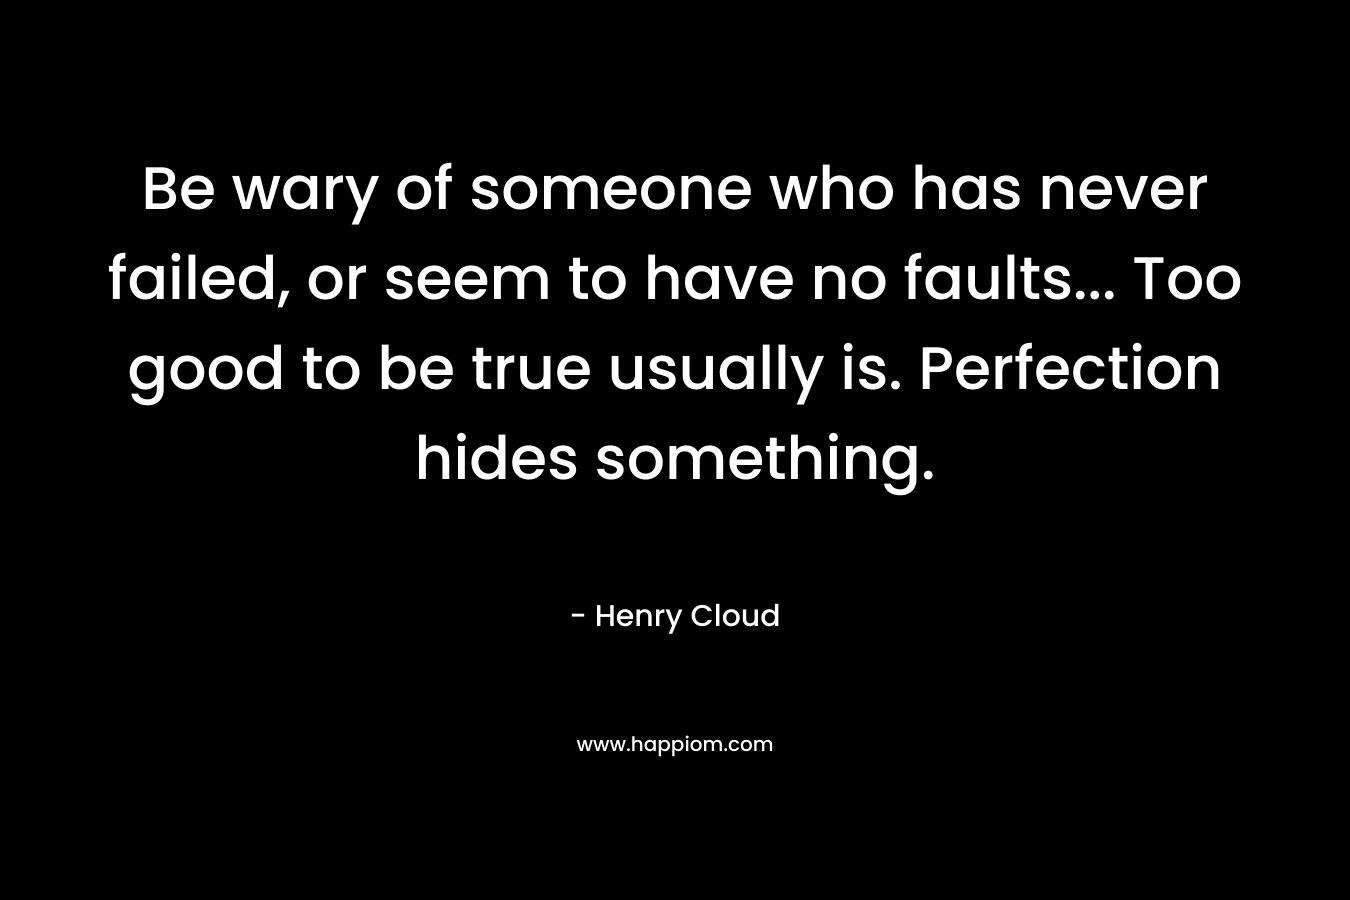 Be wary of someone who has never failed, or seem to have no faults… Too good to be true usually is. Perfection hides something. – Henry Cloud